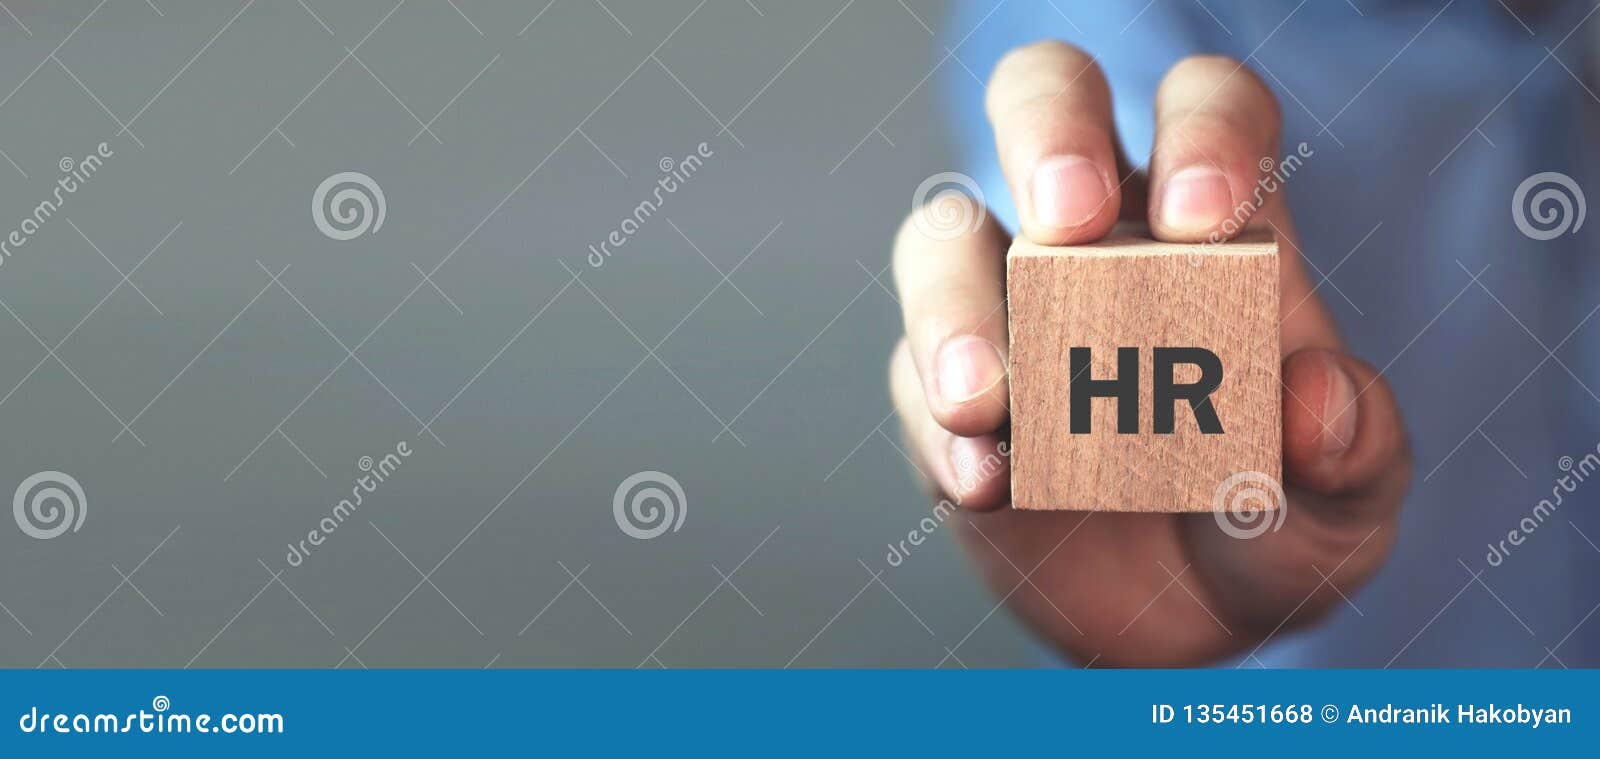 man holding hr word on wooden cube